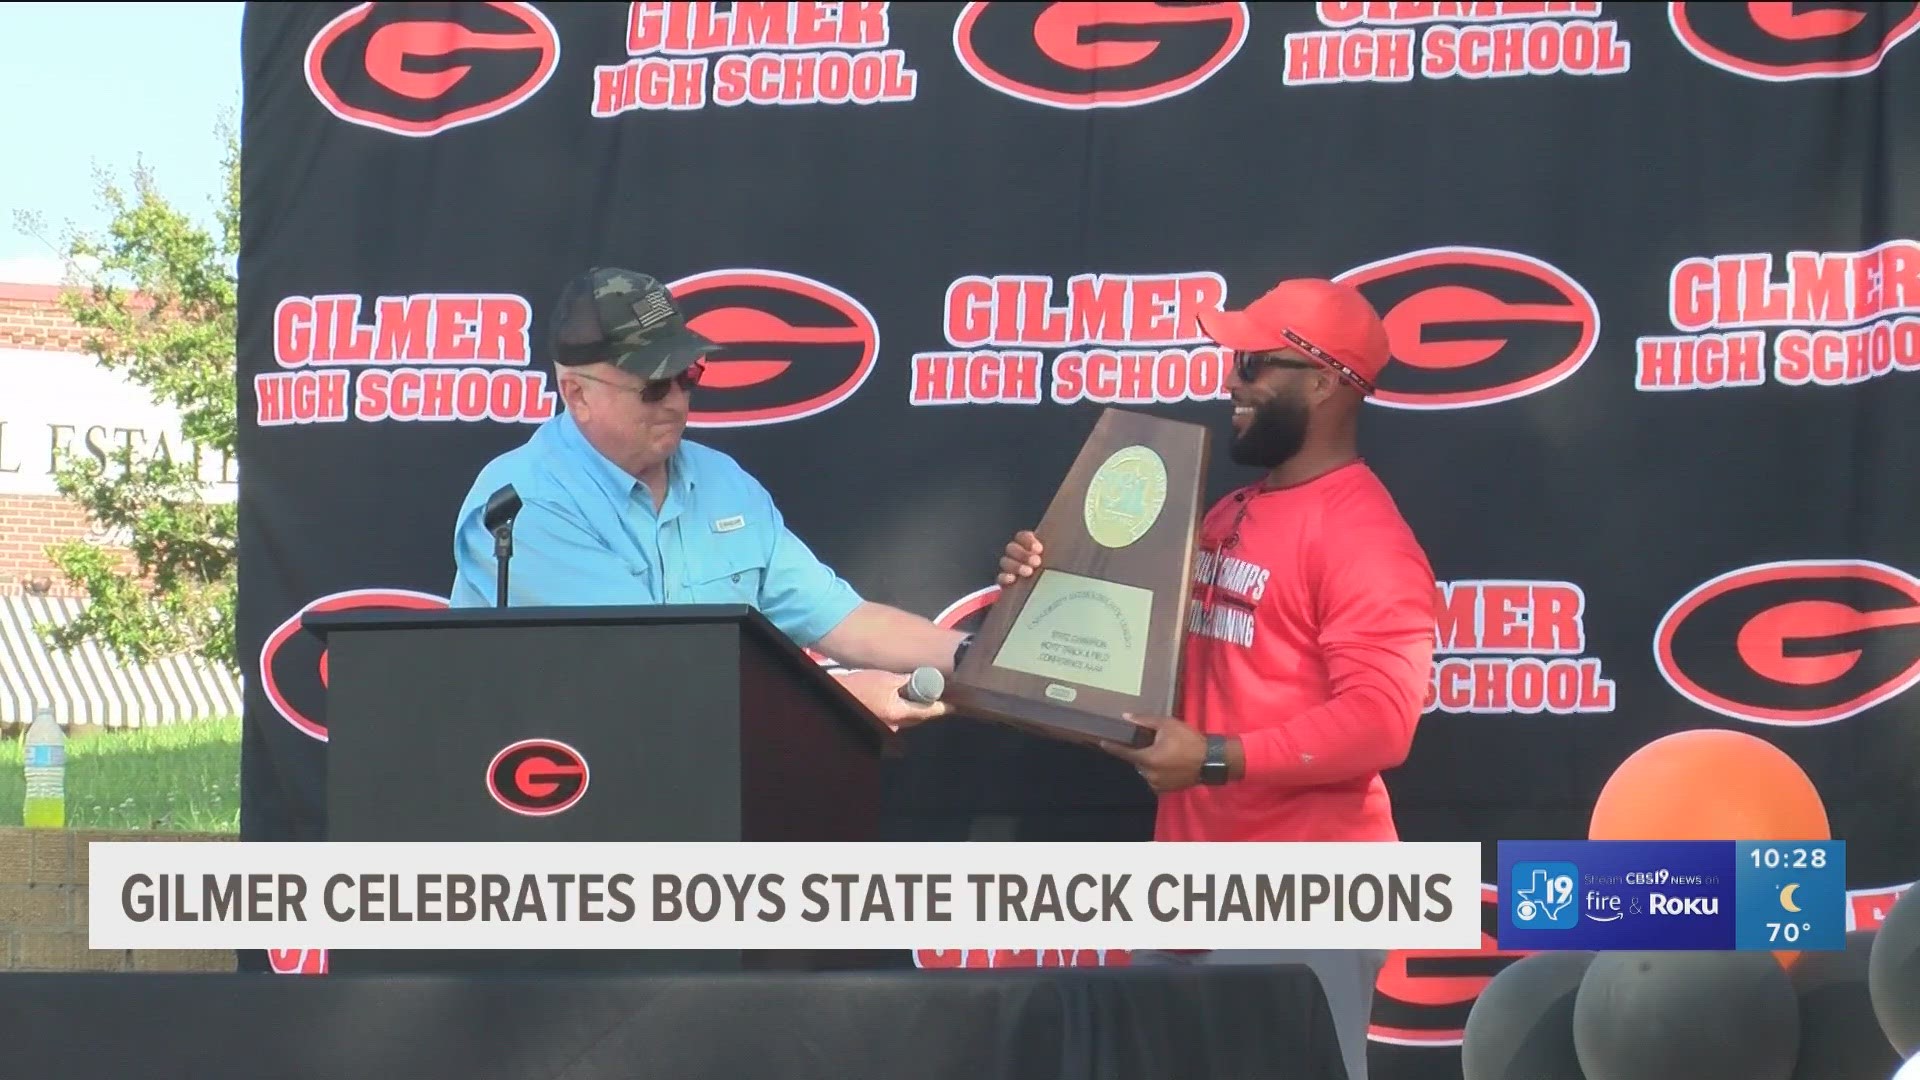 The community came out in support Wednesday as the mayor presented the state championship trophy to the Gilmer Buckeyes track team.